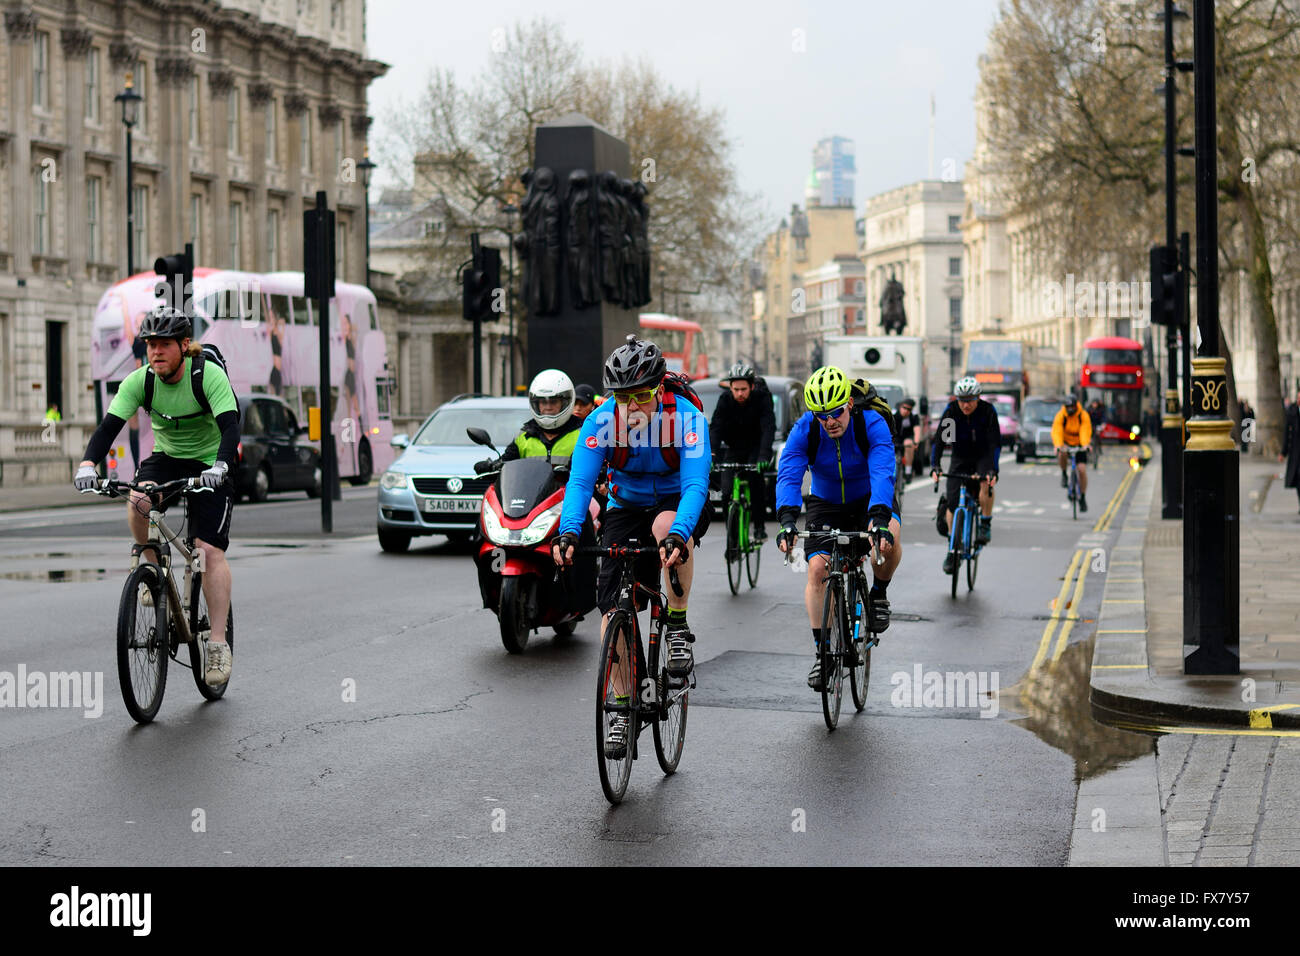 Cyclists riding on the streets of London in Wet weather Stock Photo